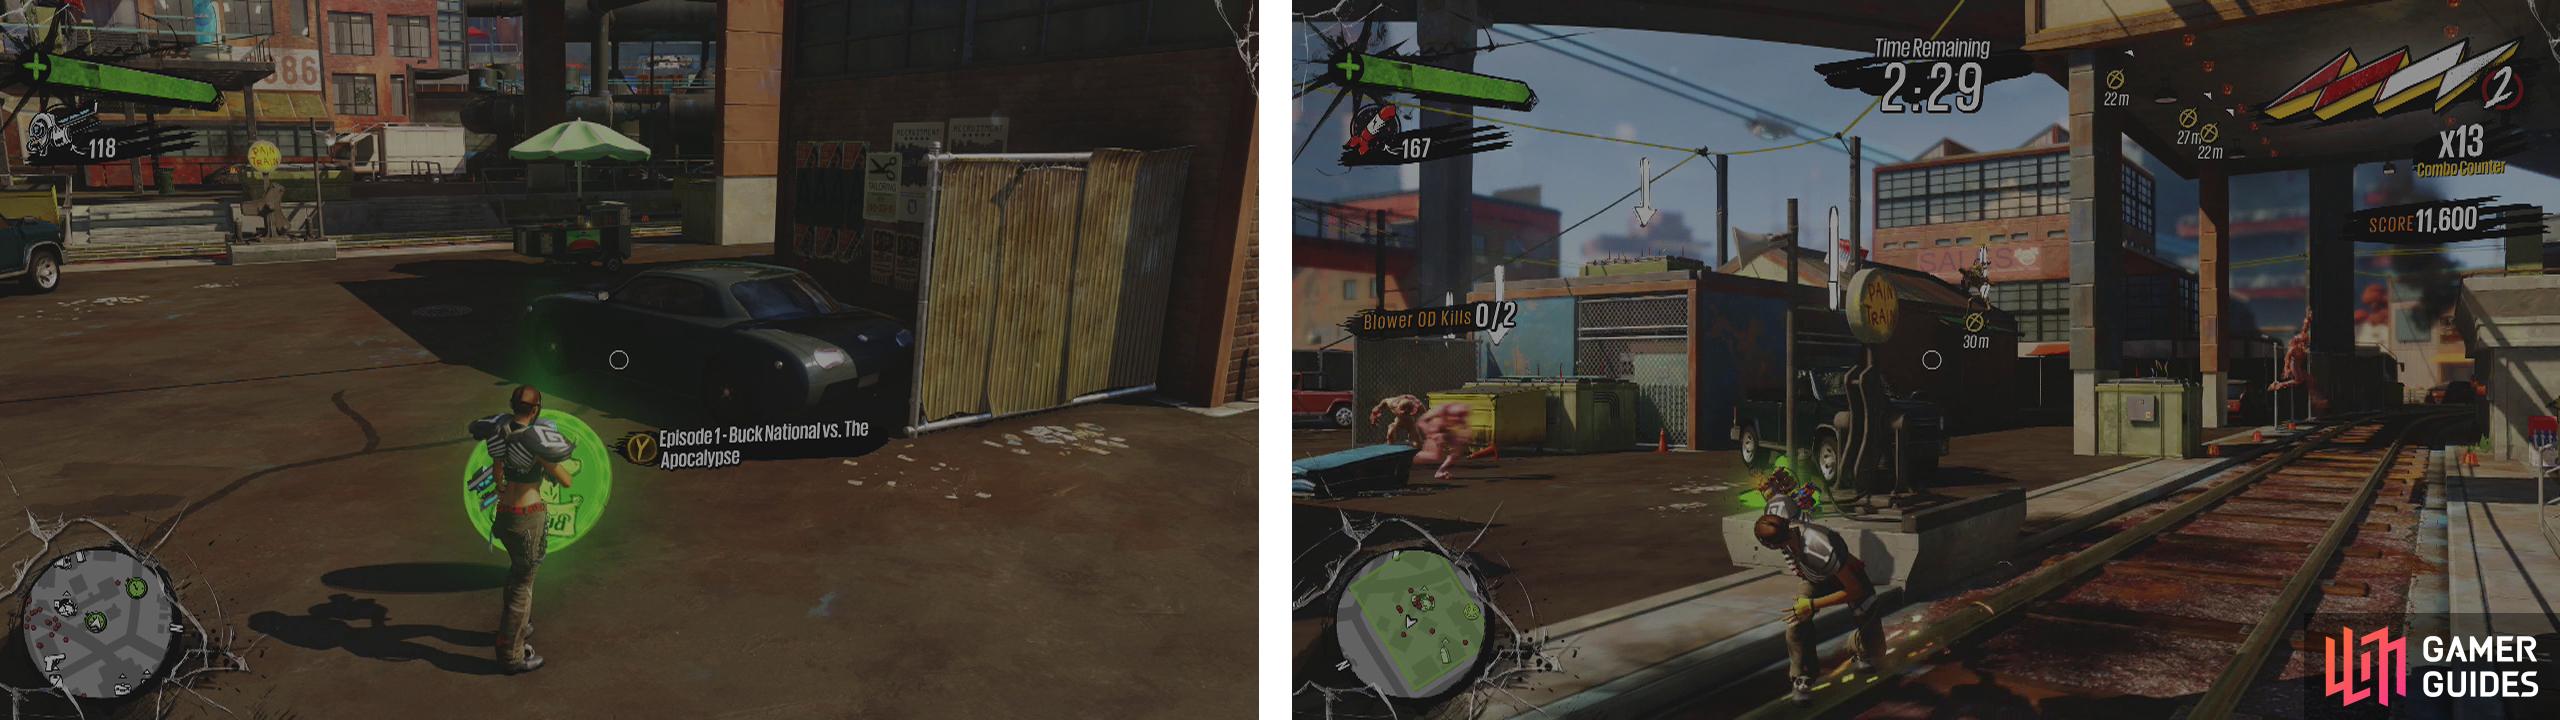 You can start the mission here (left). During the challenge, make use of the pain train switch (right) to clear out large numbers of OD.